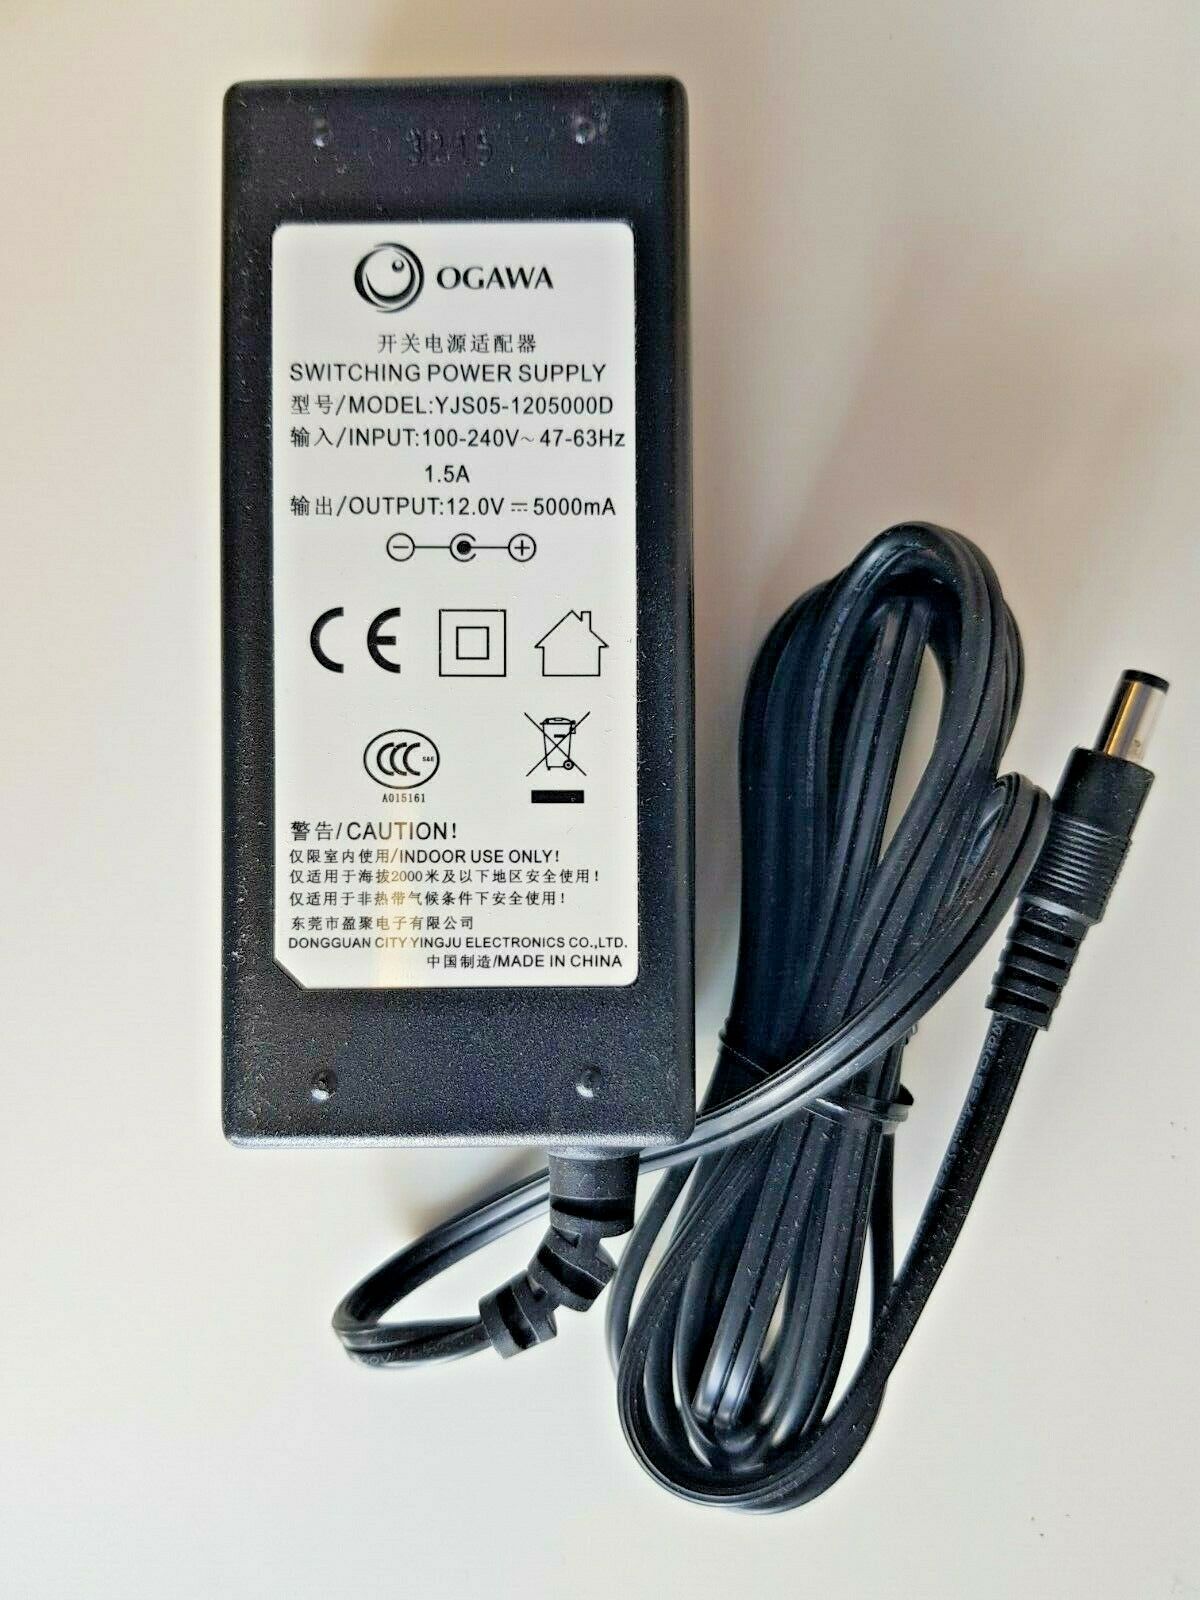 OGAWA 12.0V 5000mA Switching Power Supply Model YJS05-1205000D 12V 5A Compatible Brand: OGAWA Manufacturer Warranty: - Click Image to Close